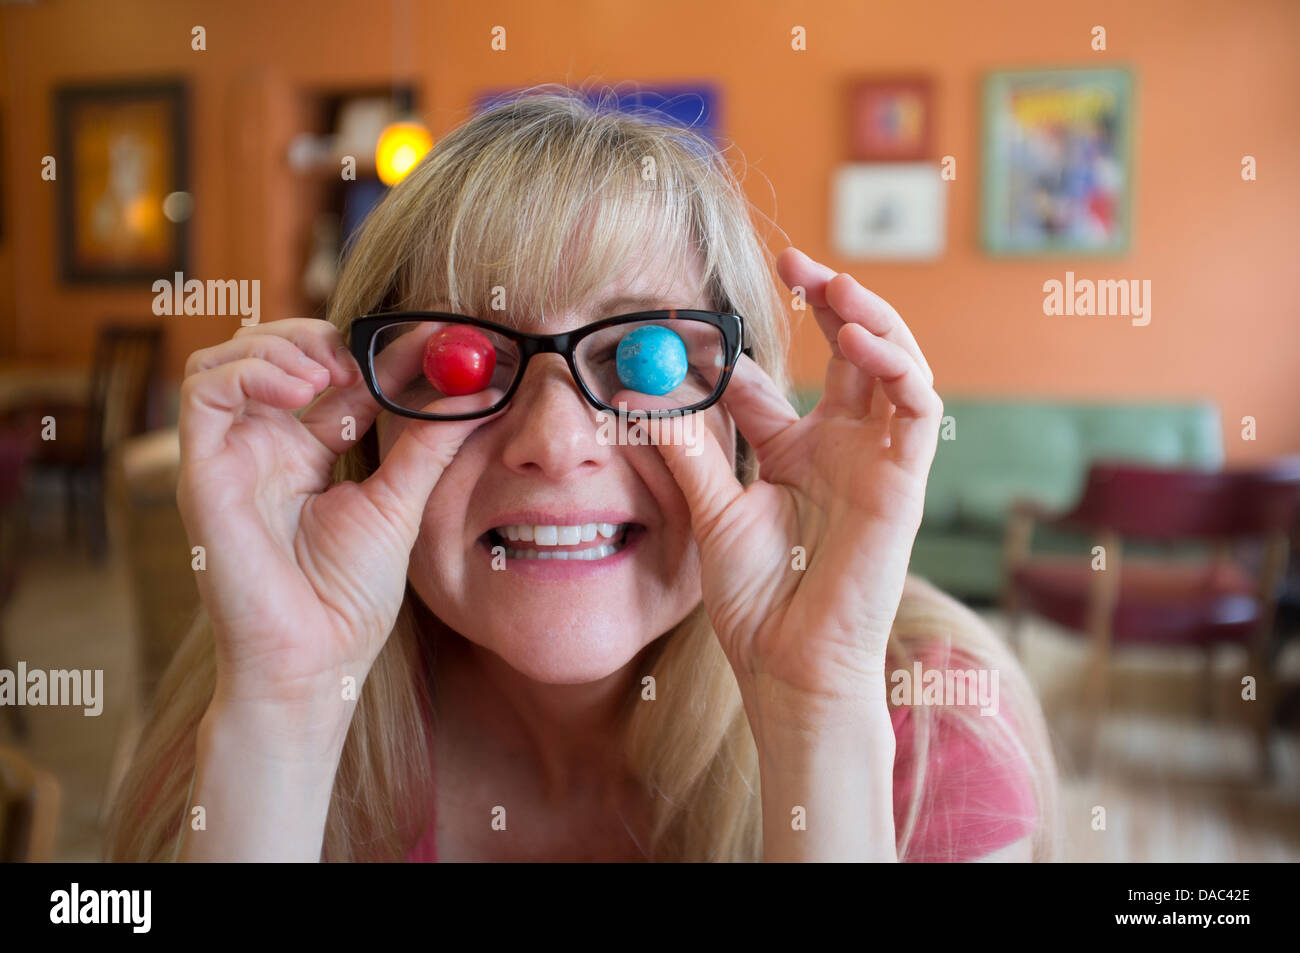 Woman holding colored, big gum balls in front of her eyes. Stock Photo